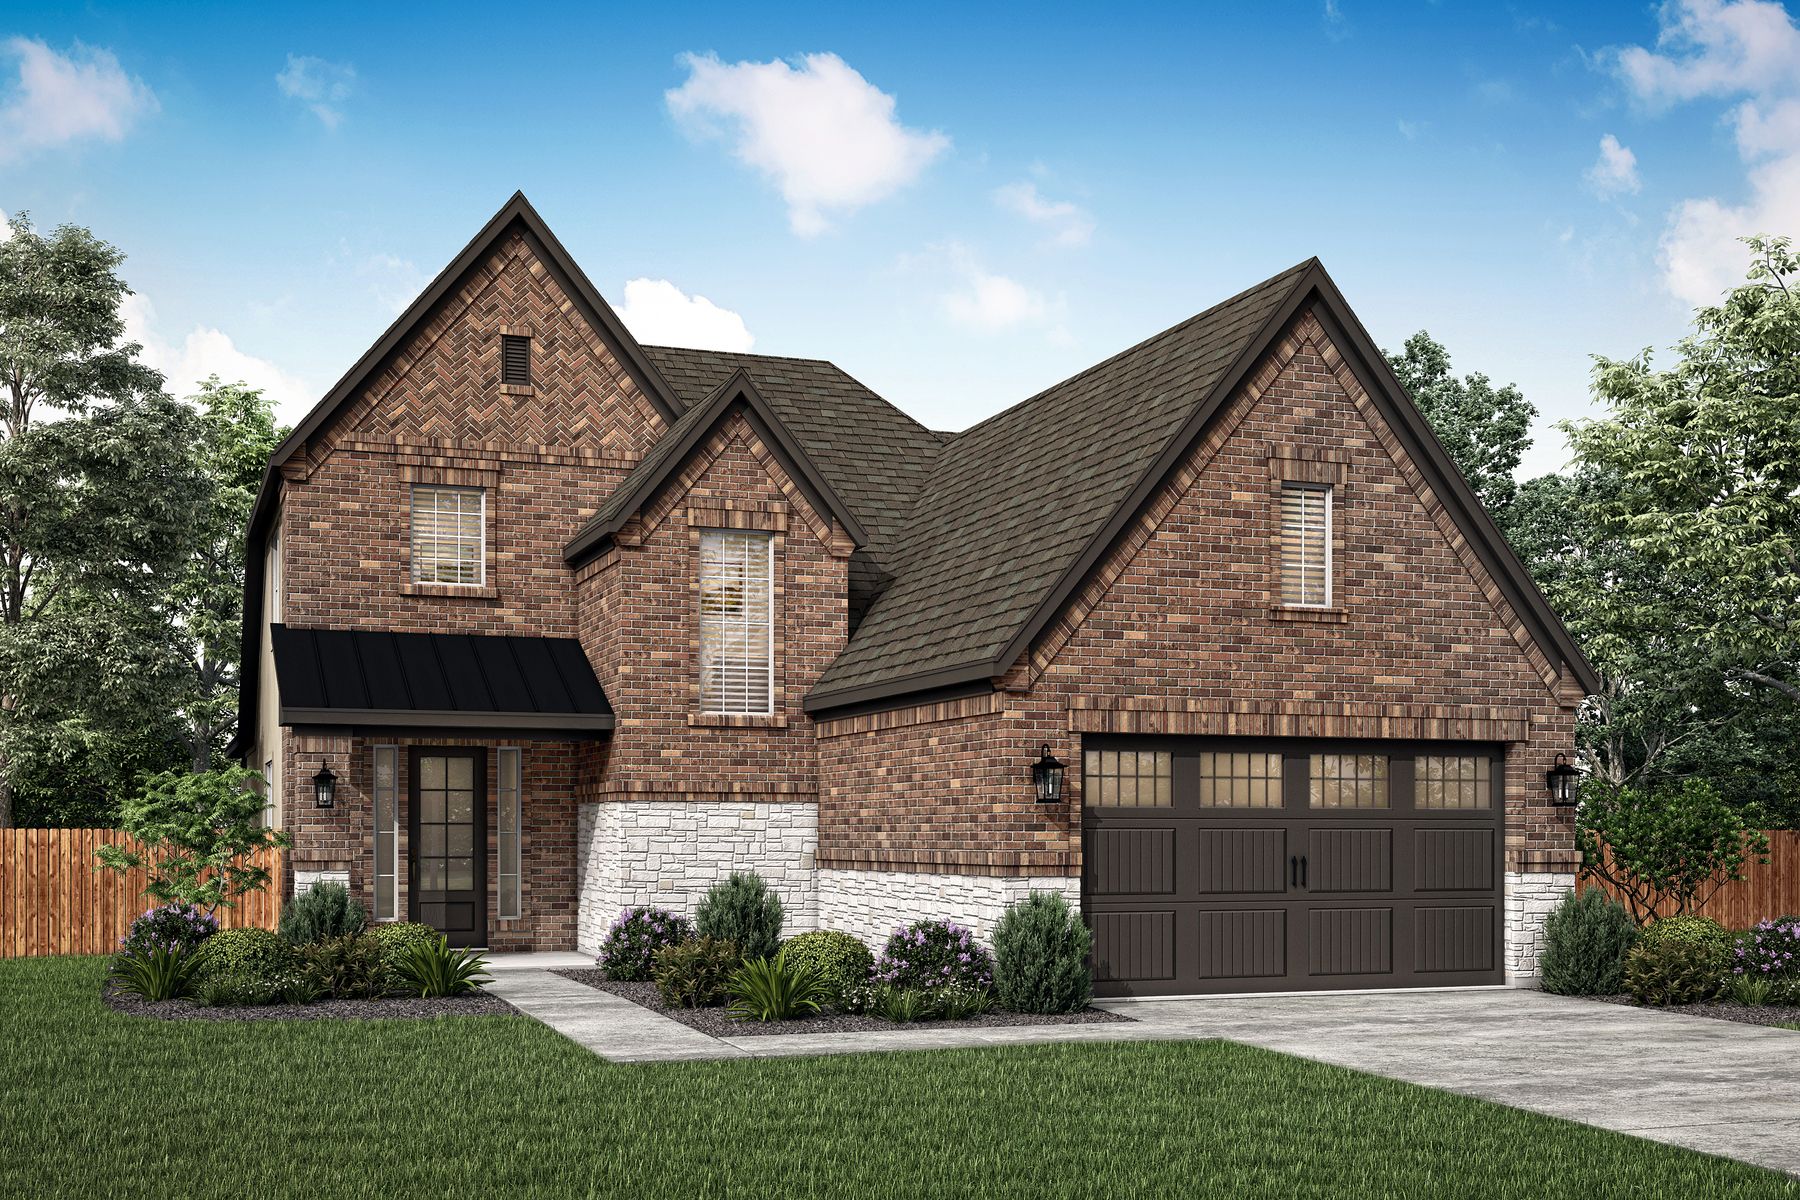 Rendering of the Naomi with exquisite curb appeal and a covered front porch.:Terrata Homes at ShadowGlen